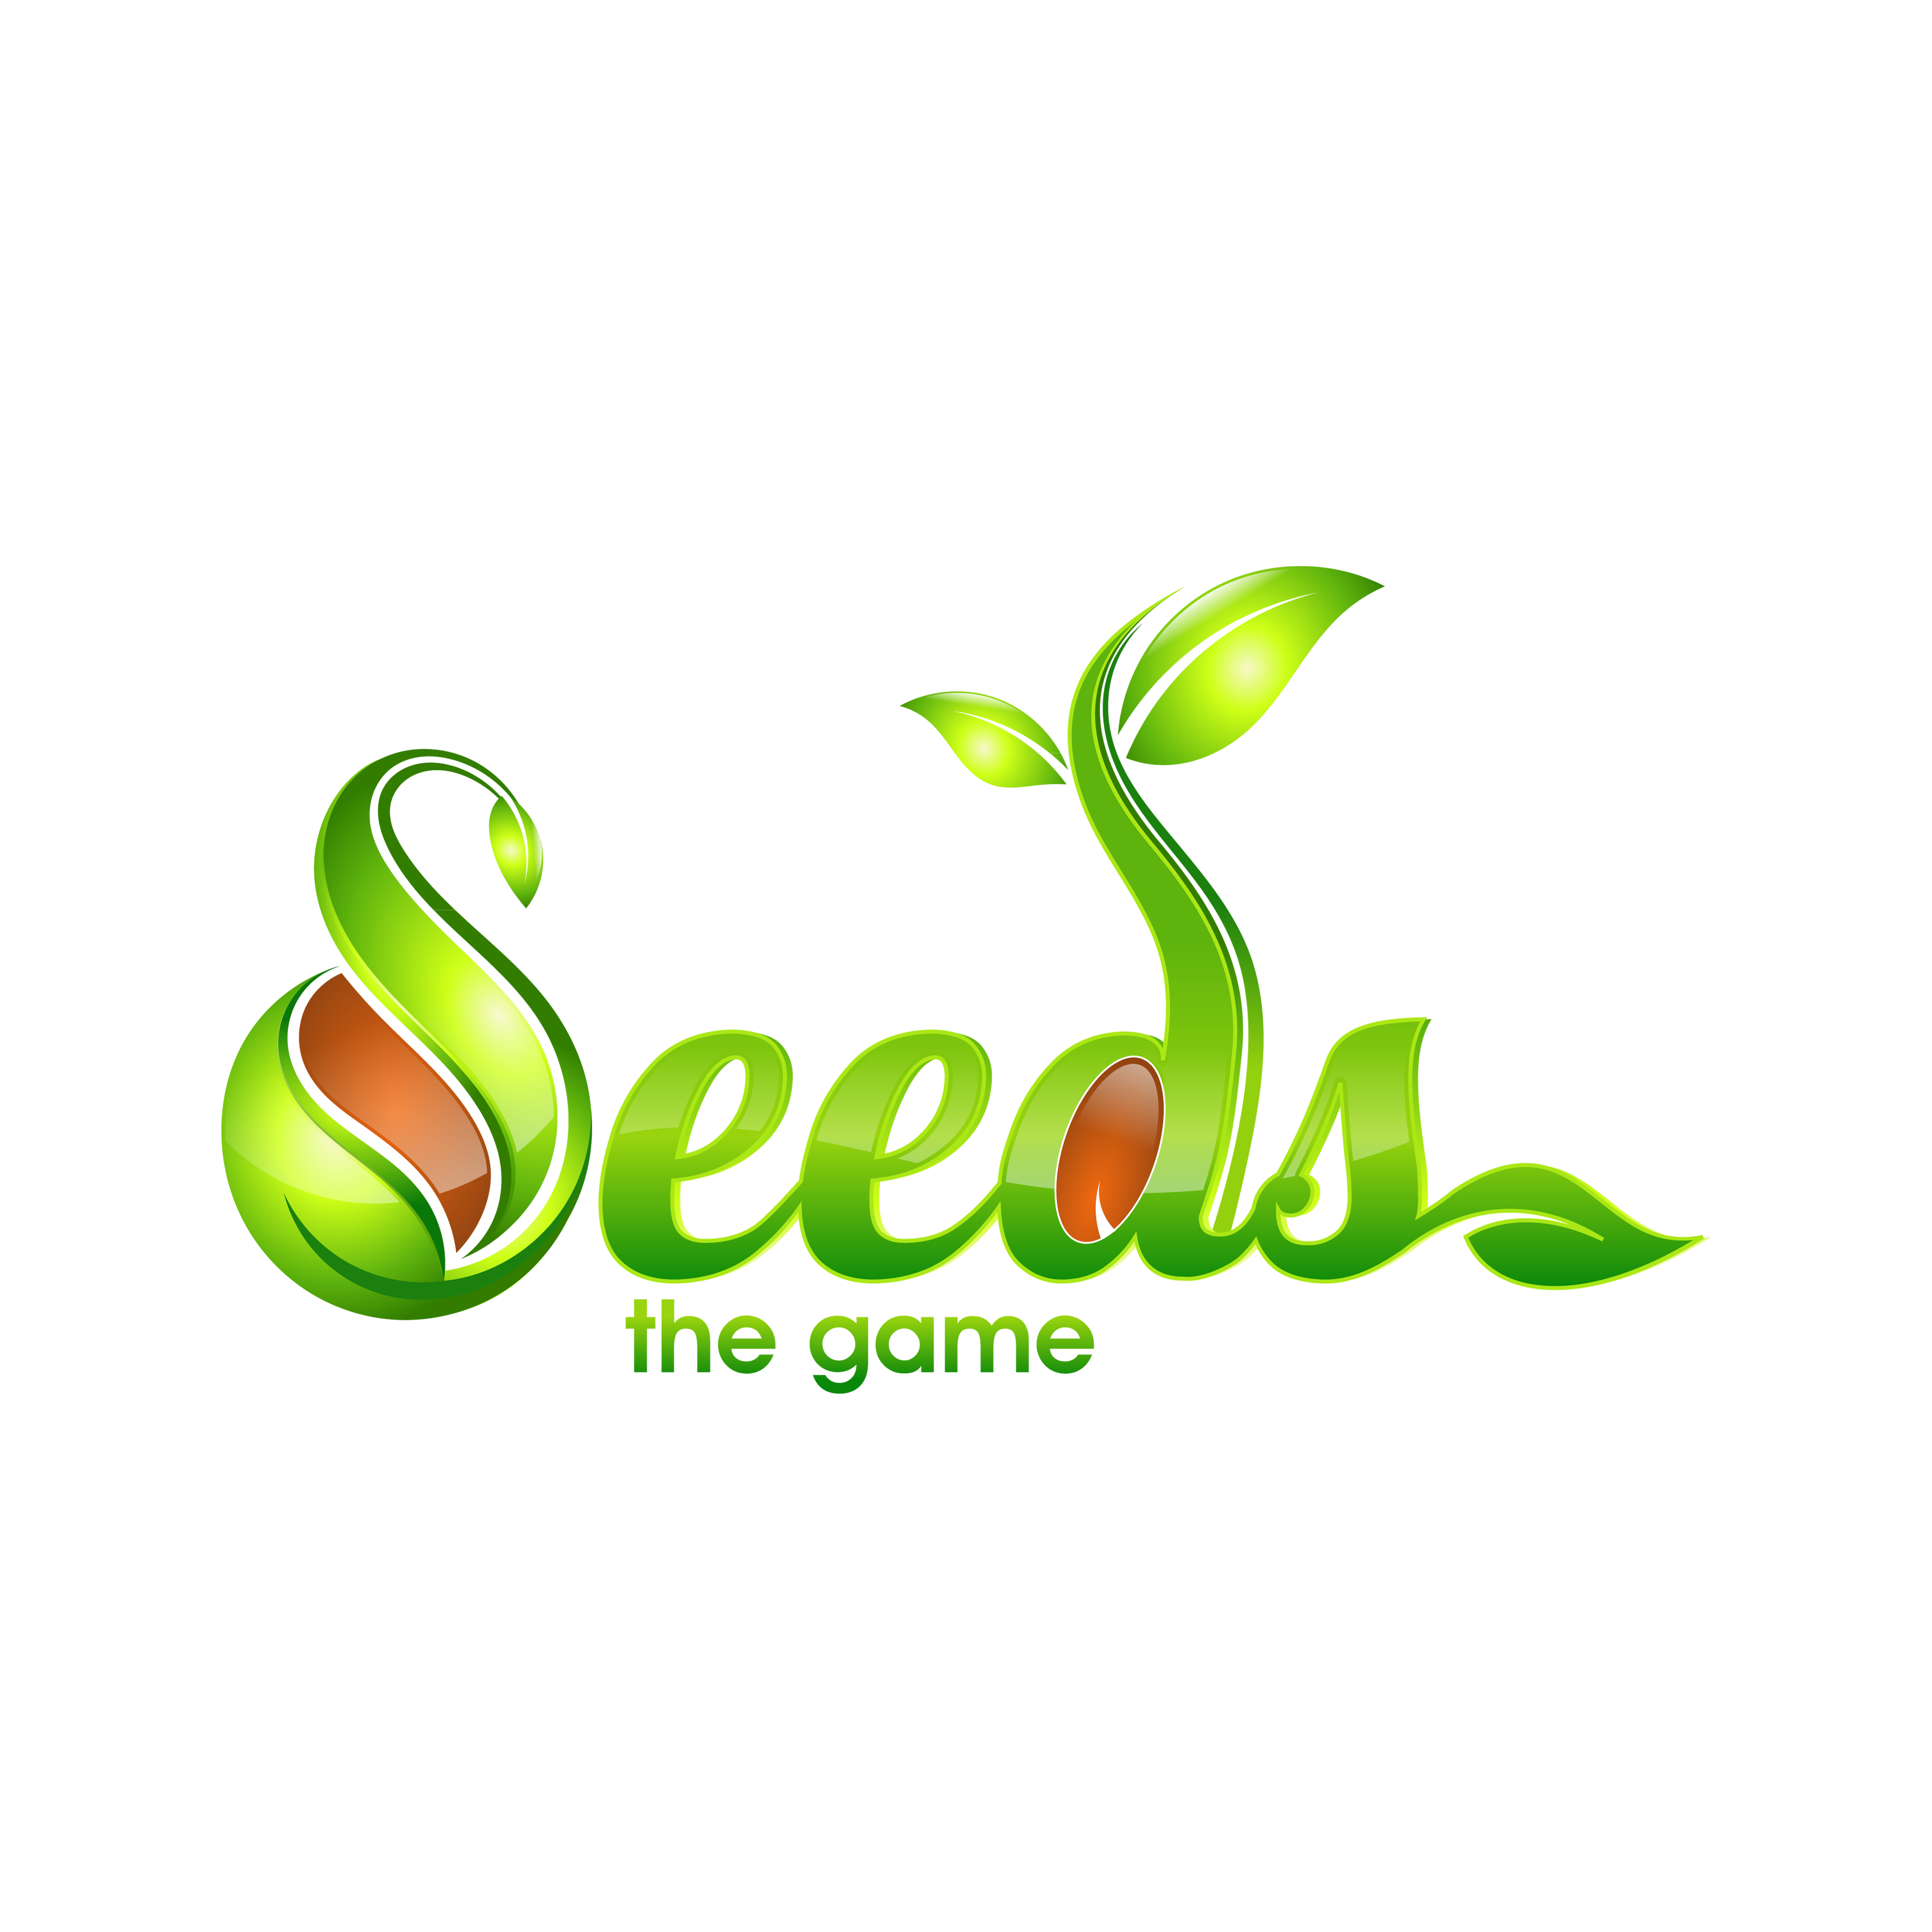 SEEDS: The Game